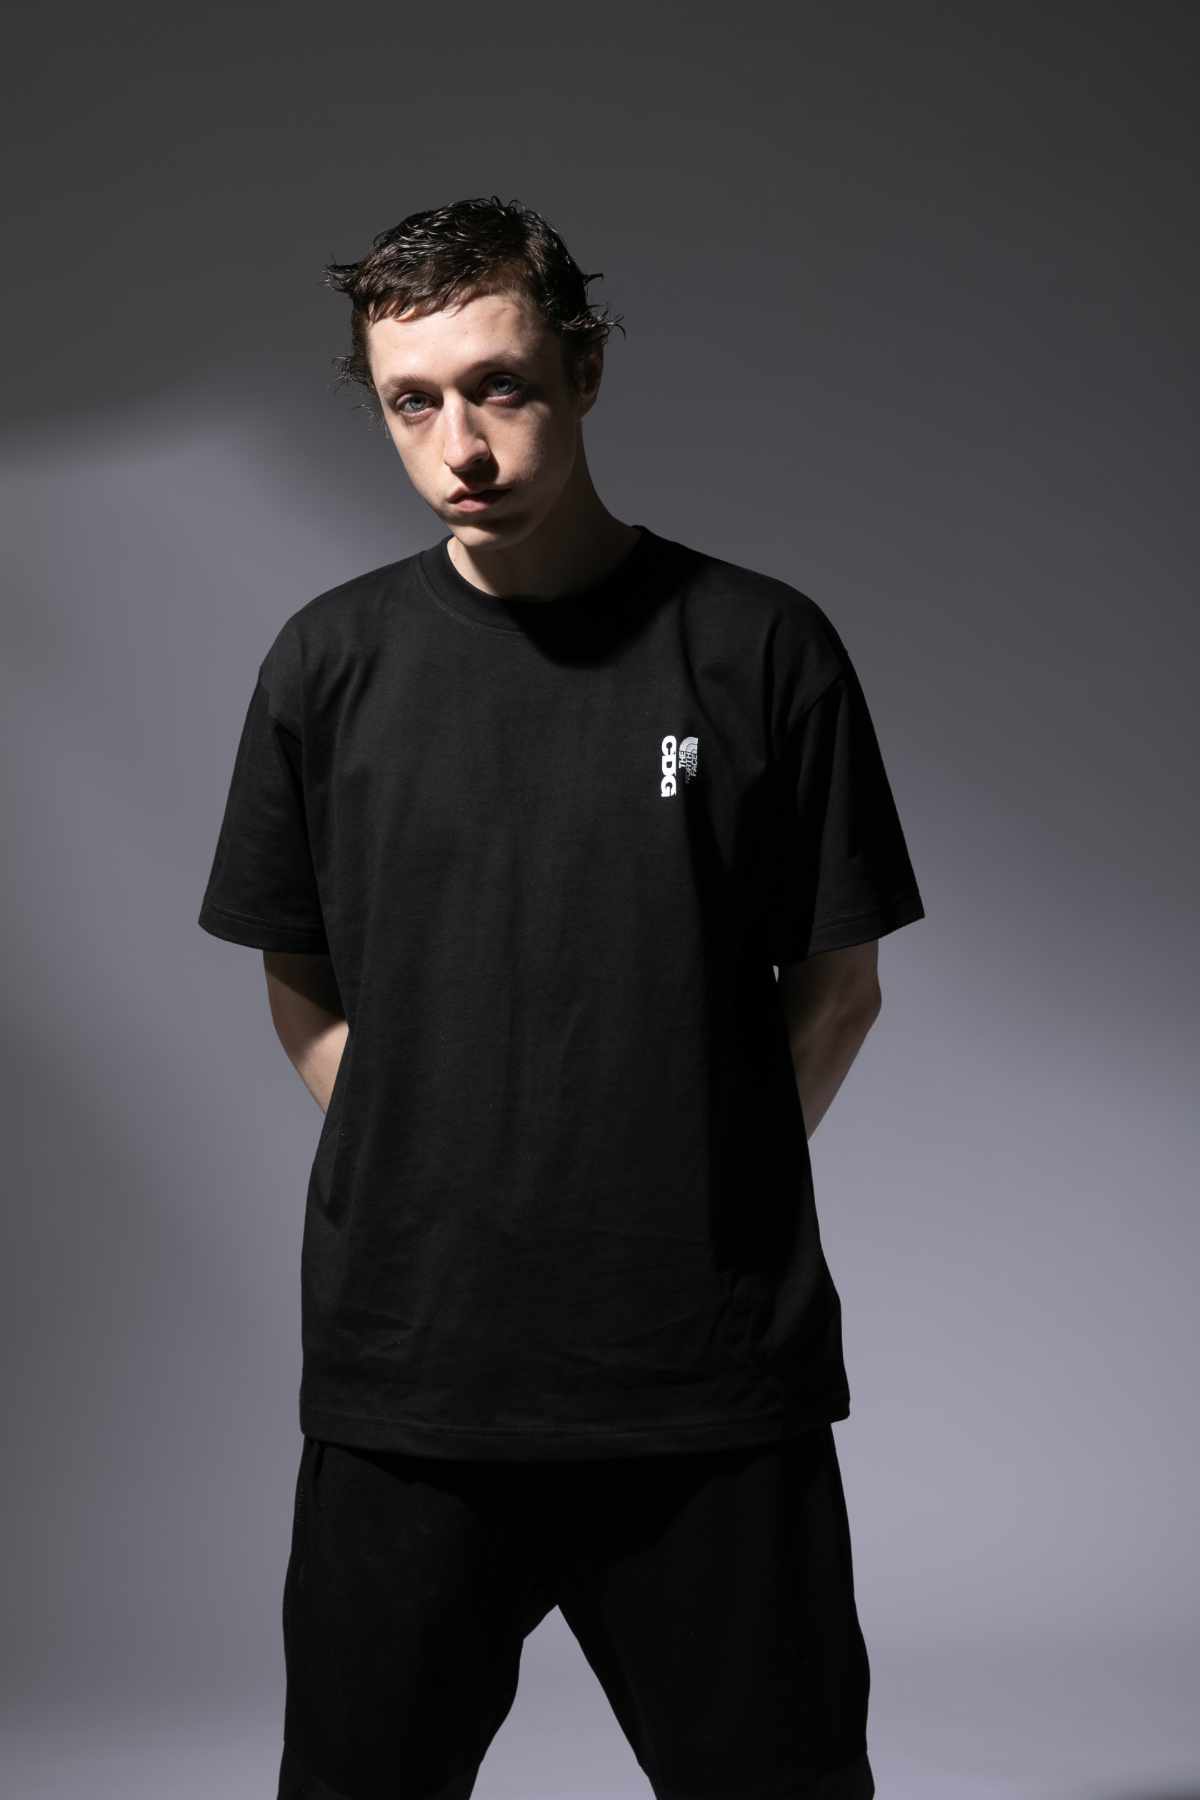 A male model wears the CDG x The North Face collaborative black T-shirt and matching trousers